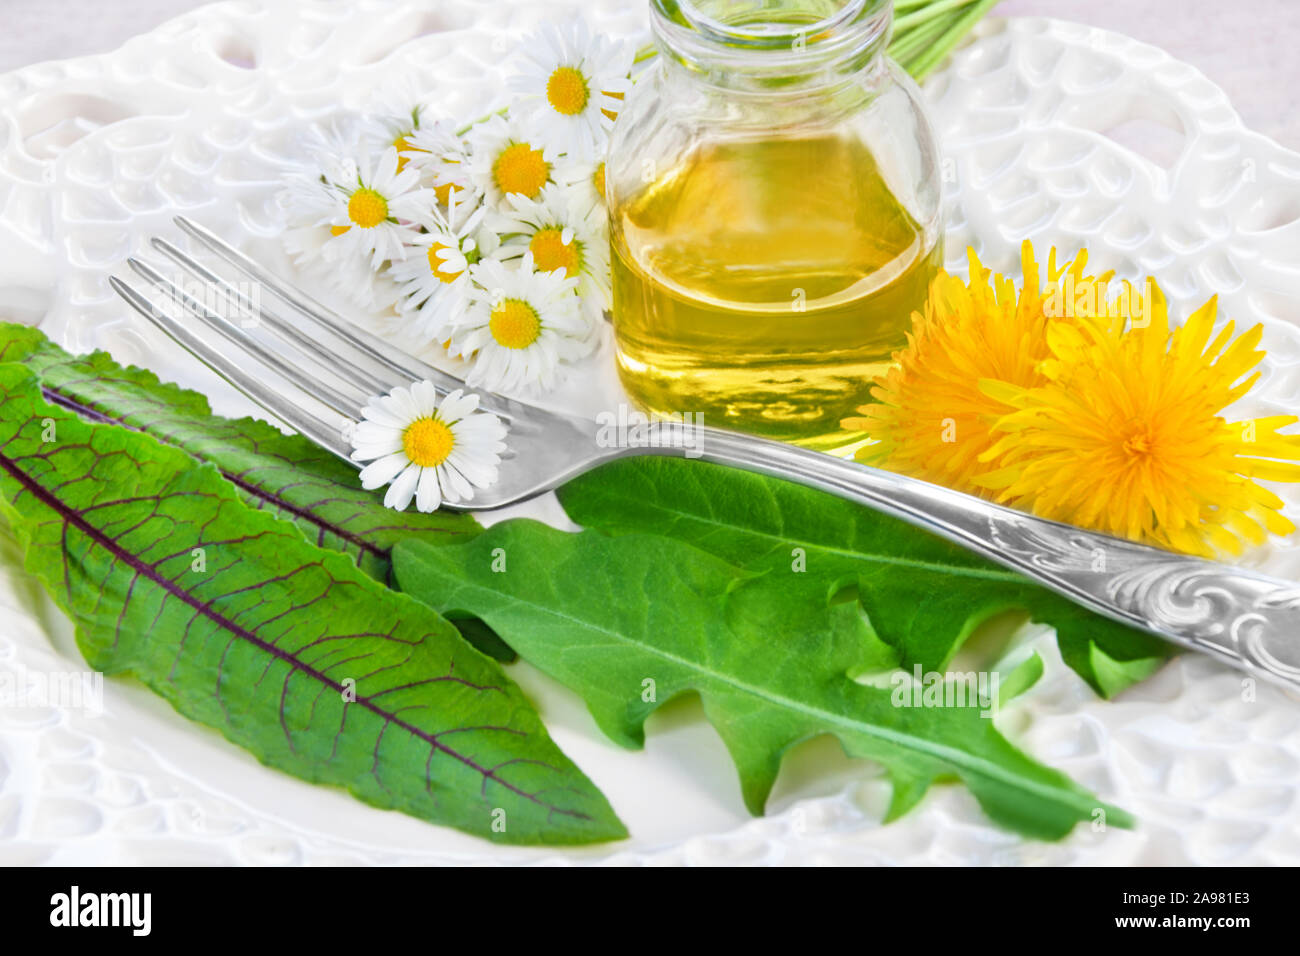 Salat weeds and eatable blossoms Stock Photo